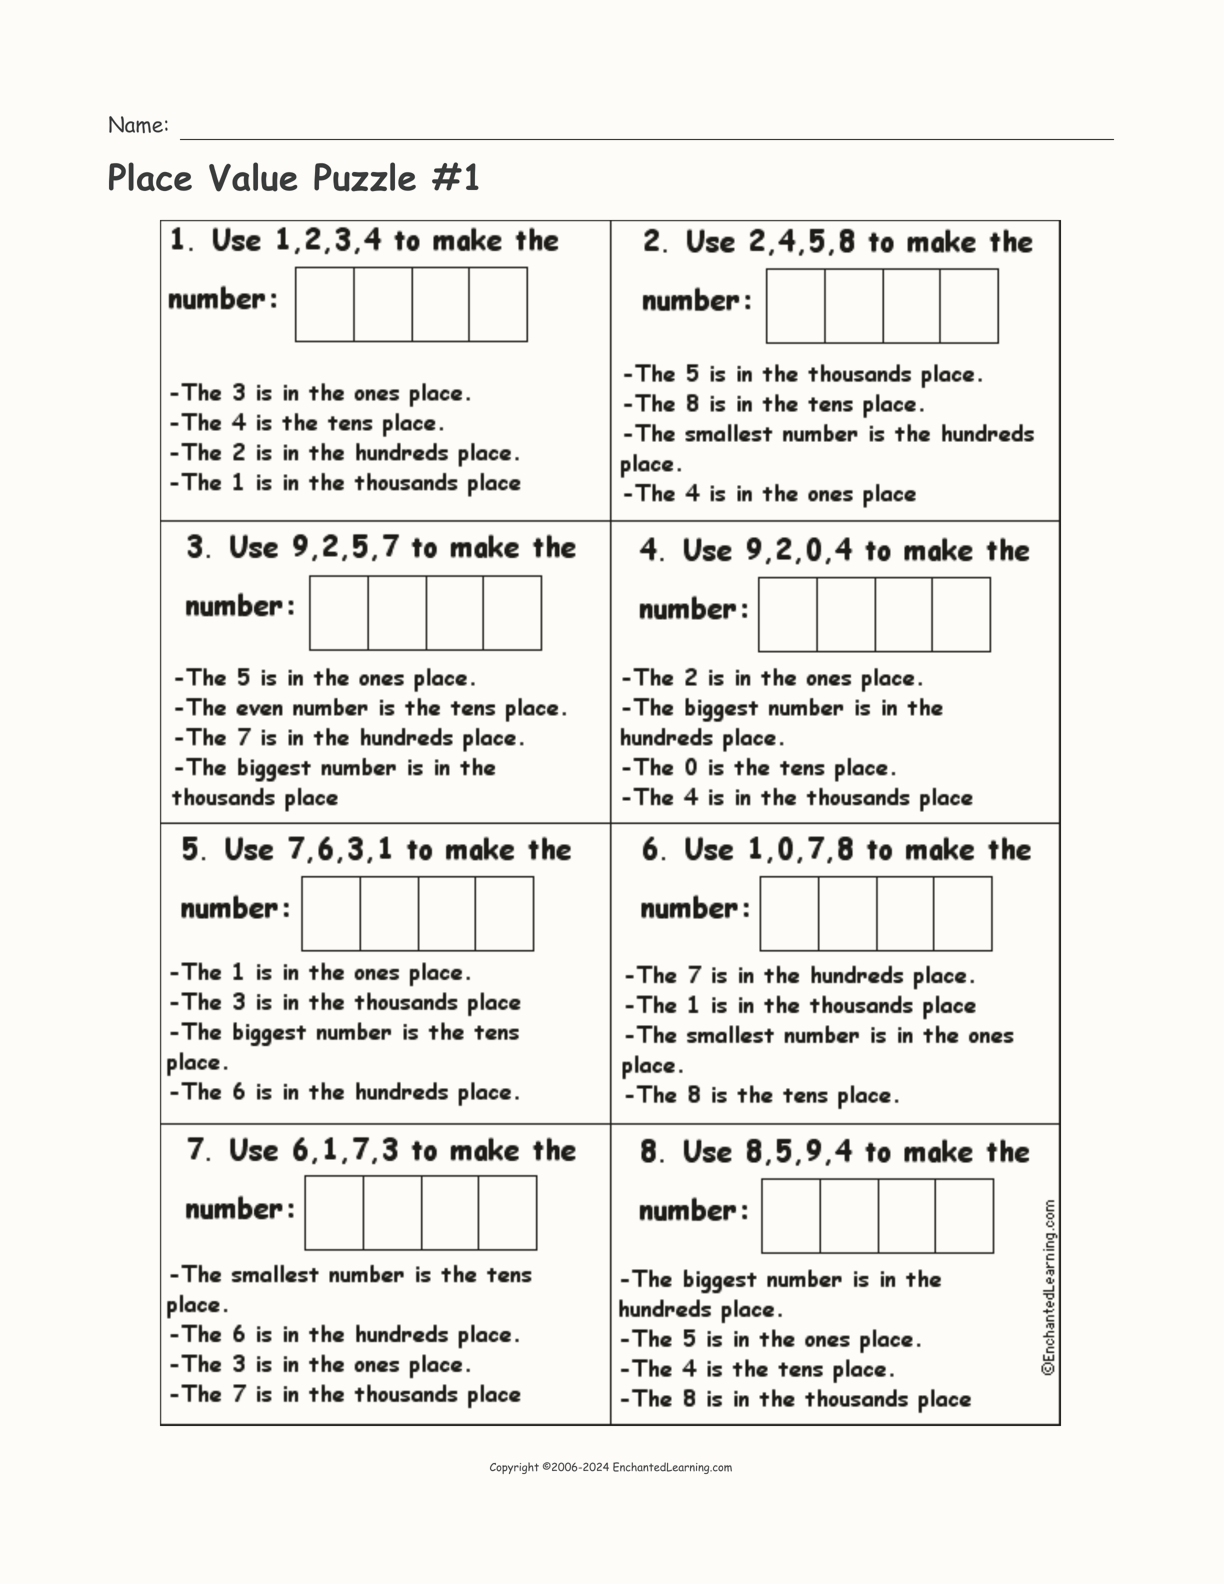 Place Value Puzzle #1 interactive worksheet page 1